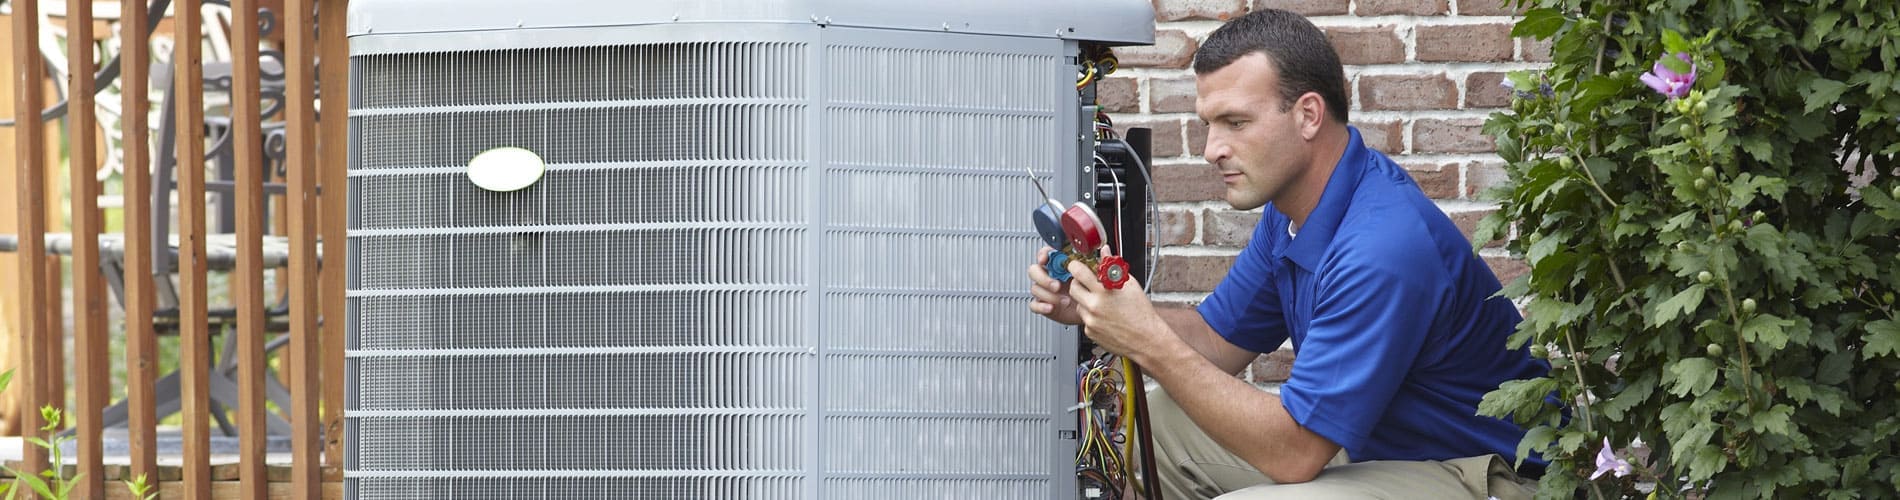 Air Conditioning And Heating Austin, TX - Emergency Home AC Installation And Heating System Repair